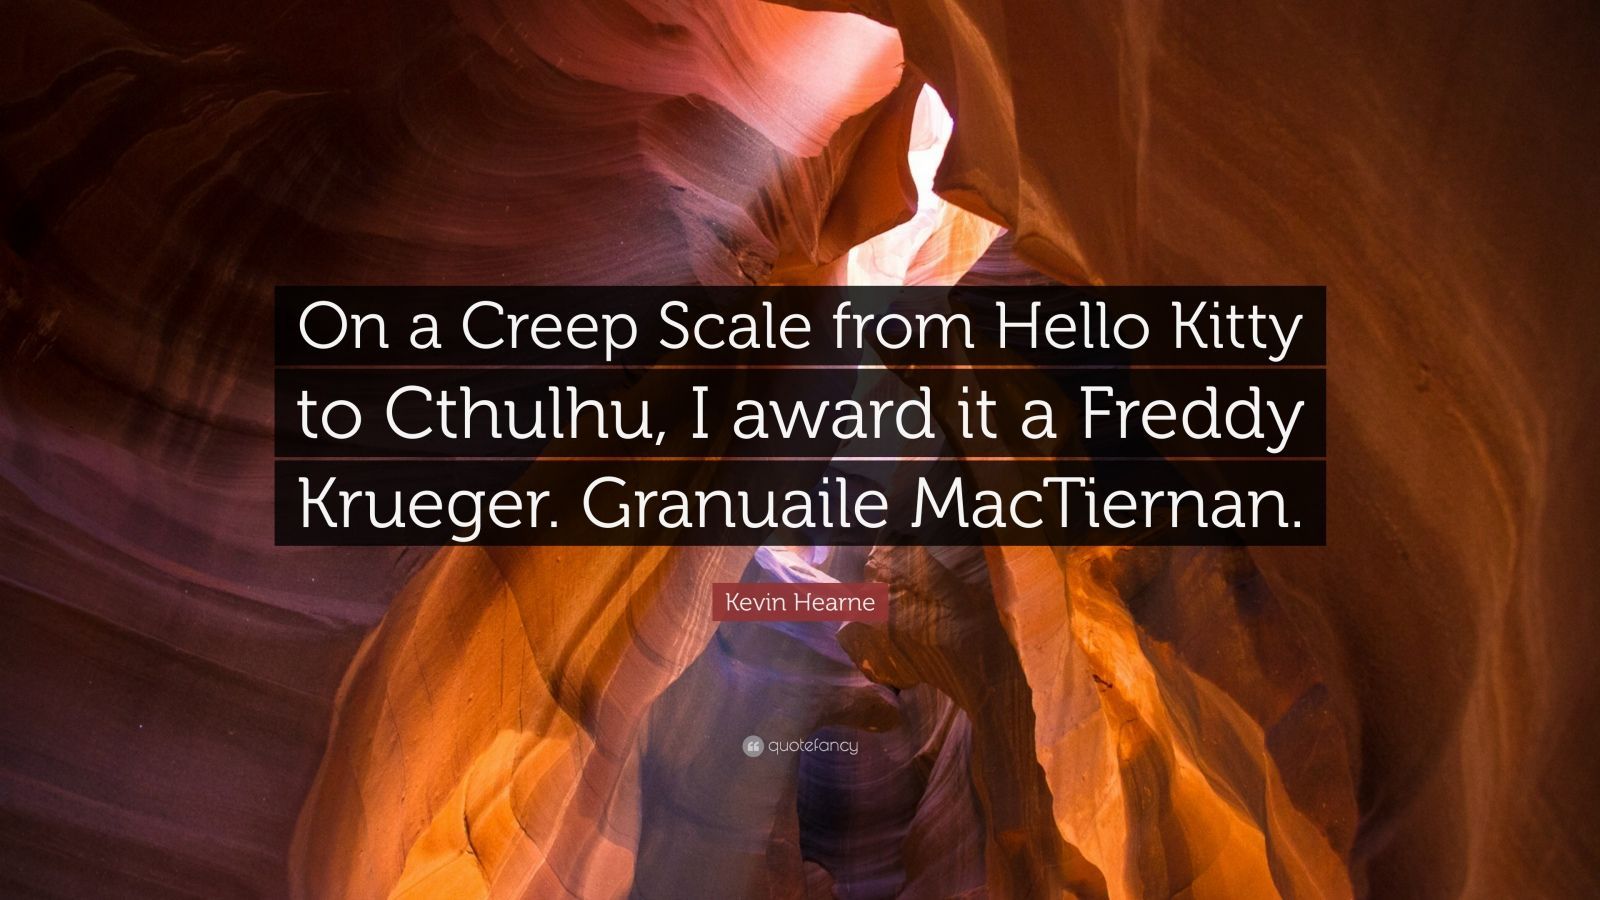 Kevin Hearne Quote: “On a Creep Scale from Hello Kitty to Cthulhu